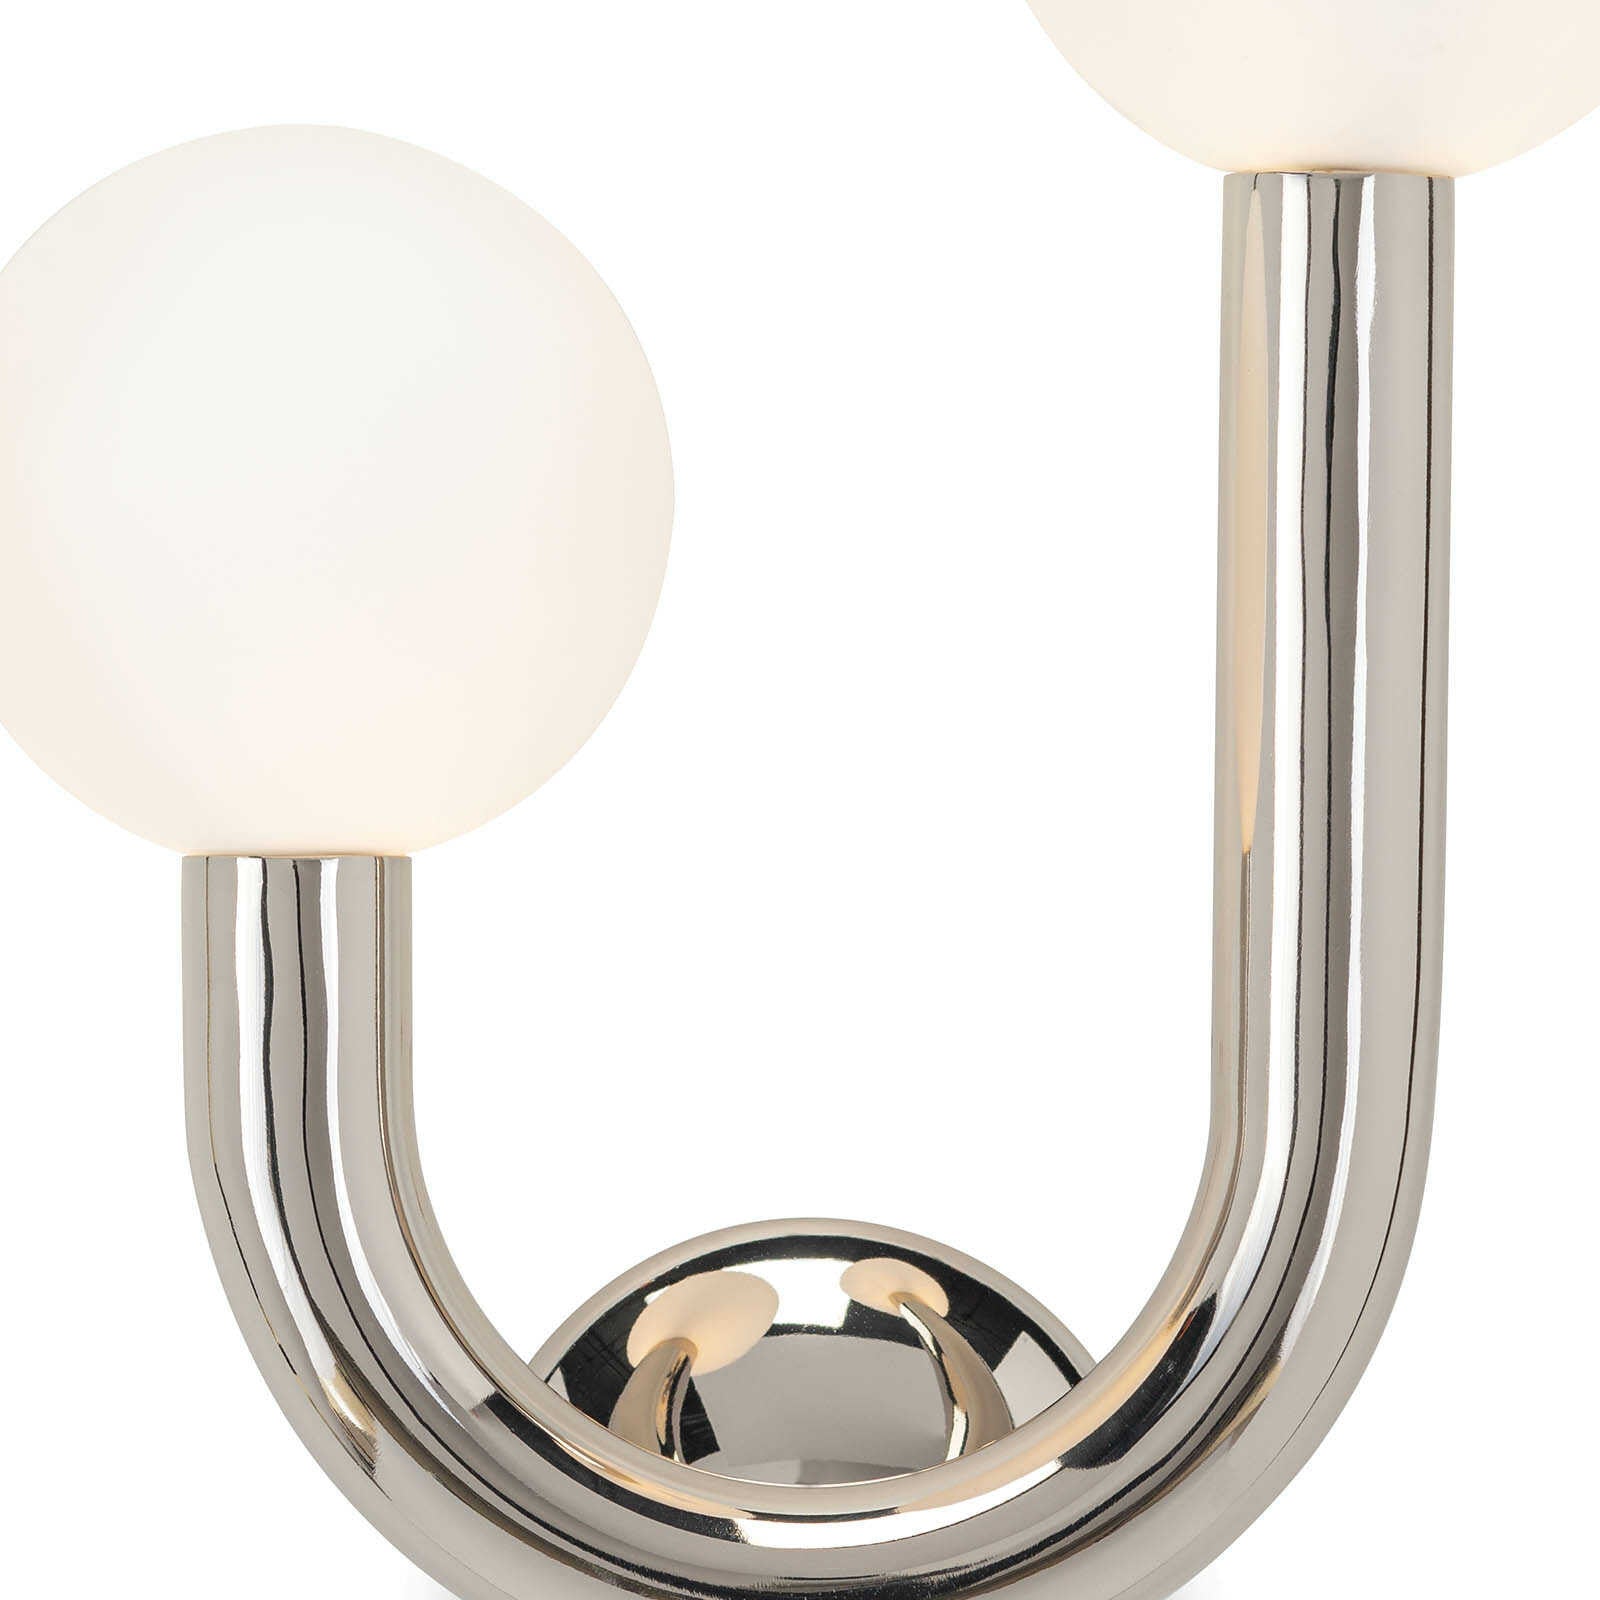 We love the unique, symmetrical shape of this Happy Sconce. This adds a modern yet playful lighting to any kitchen, living room, or other area needing extra lighting.    Overall Dimensions: 11.25"w x 5.5"d x 16.25"h